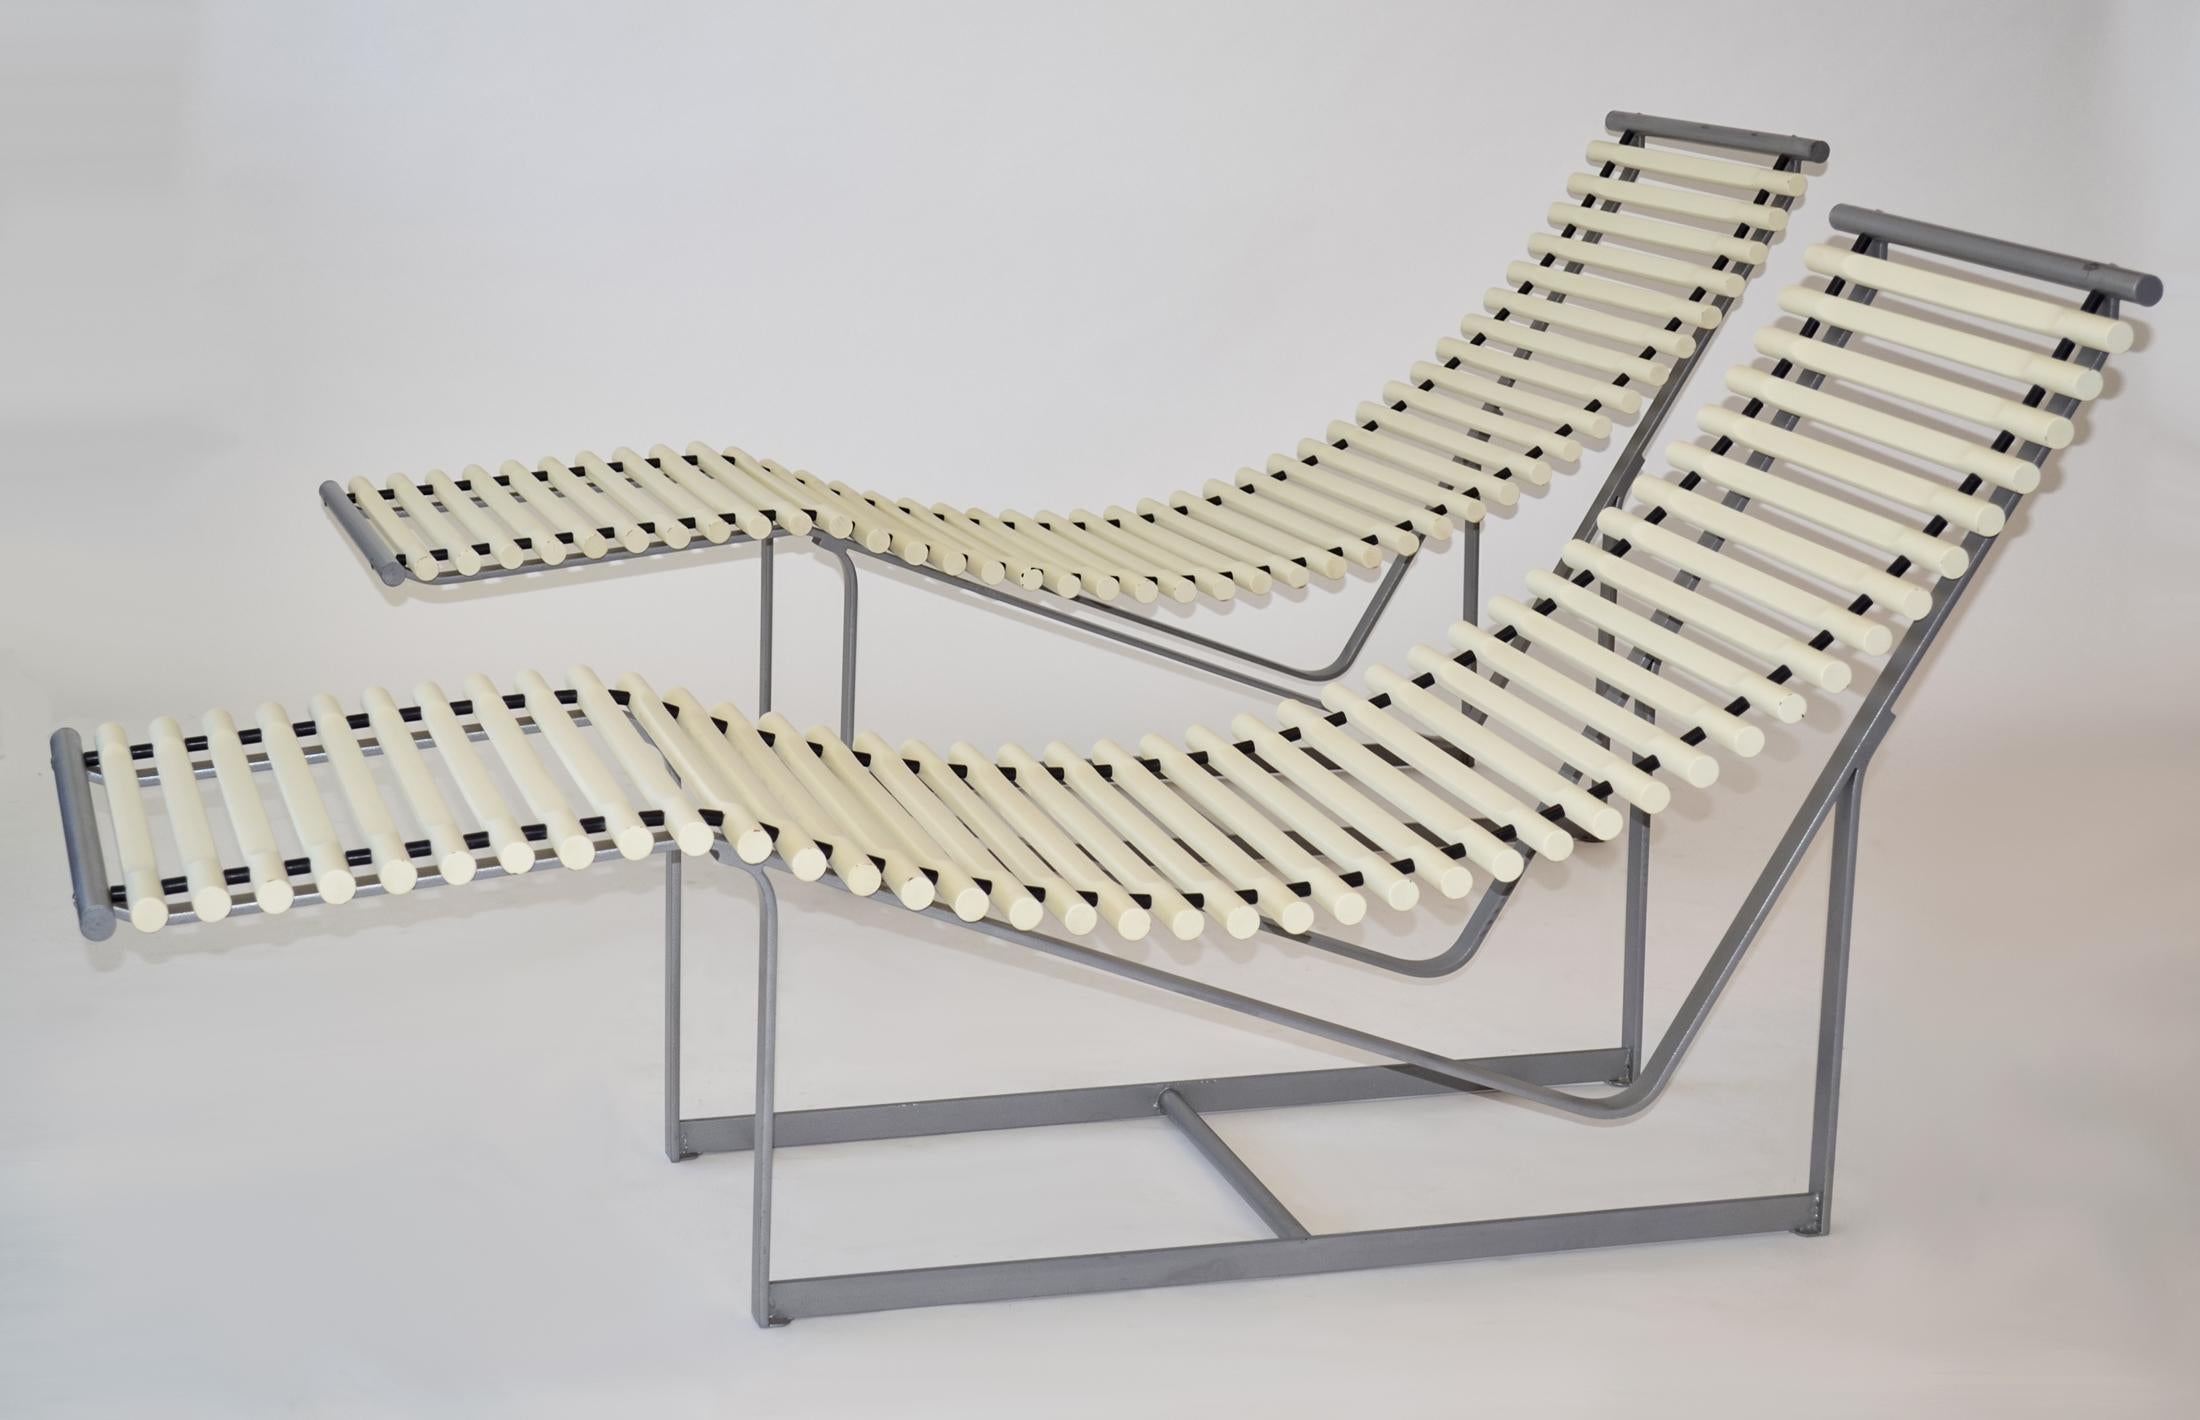 Pair of Peter Strassl Spine Back Lounge Chairs or Chaises Germany 1978

Designed by Peter Strassl in Germany in 1978, this pair of chaise lounge chairs feature a striking sculptural shape - the white, painted solid beech wooden spines give it a